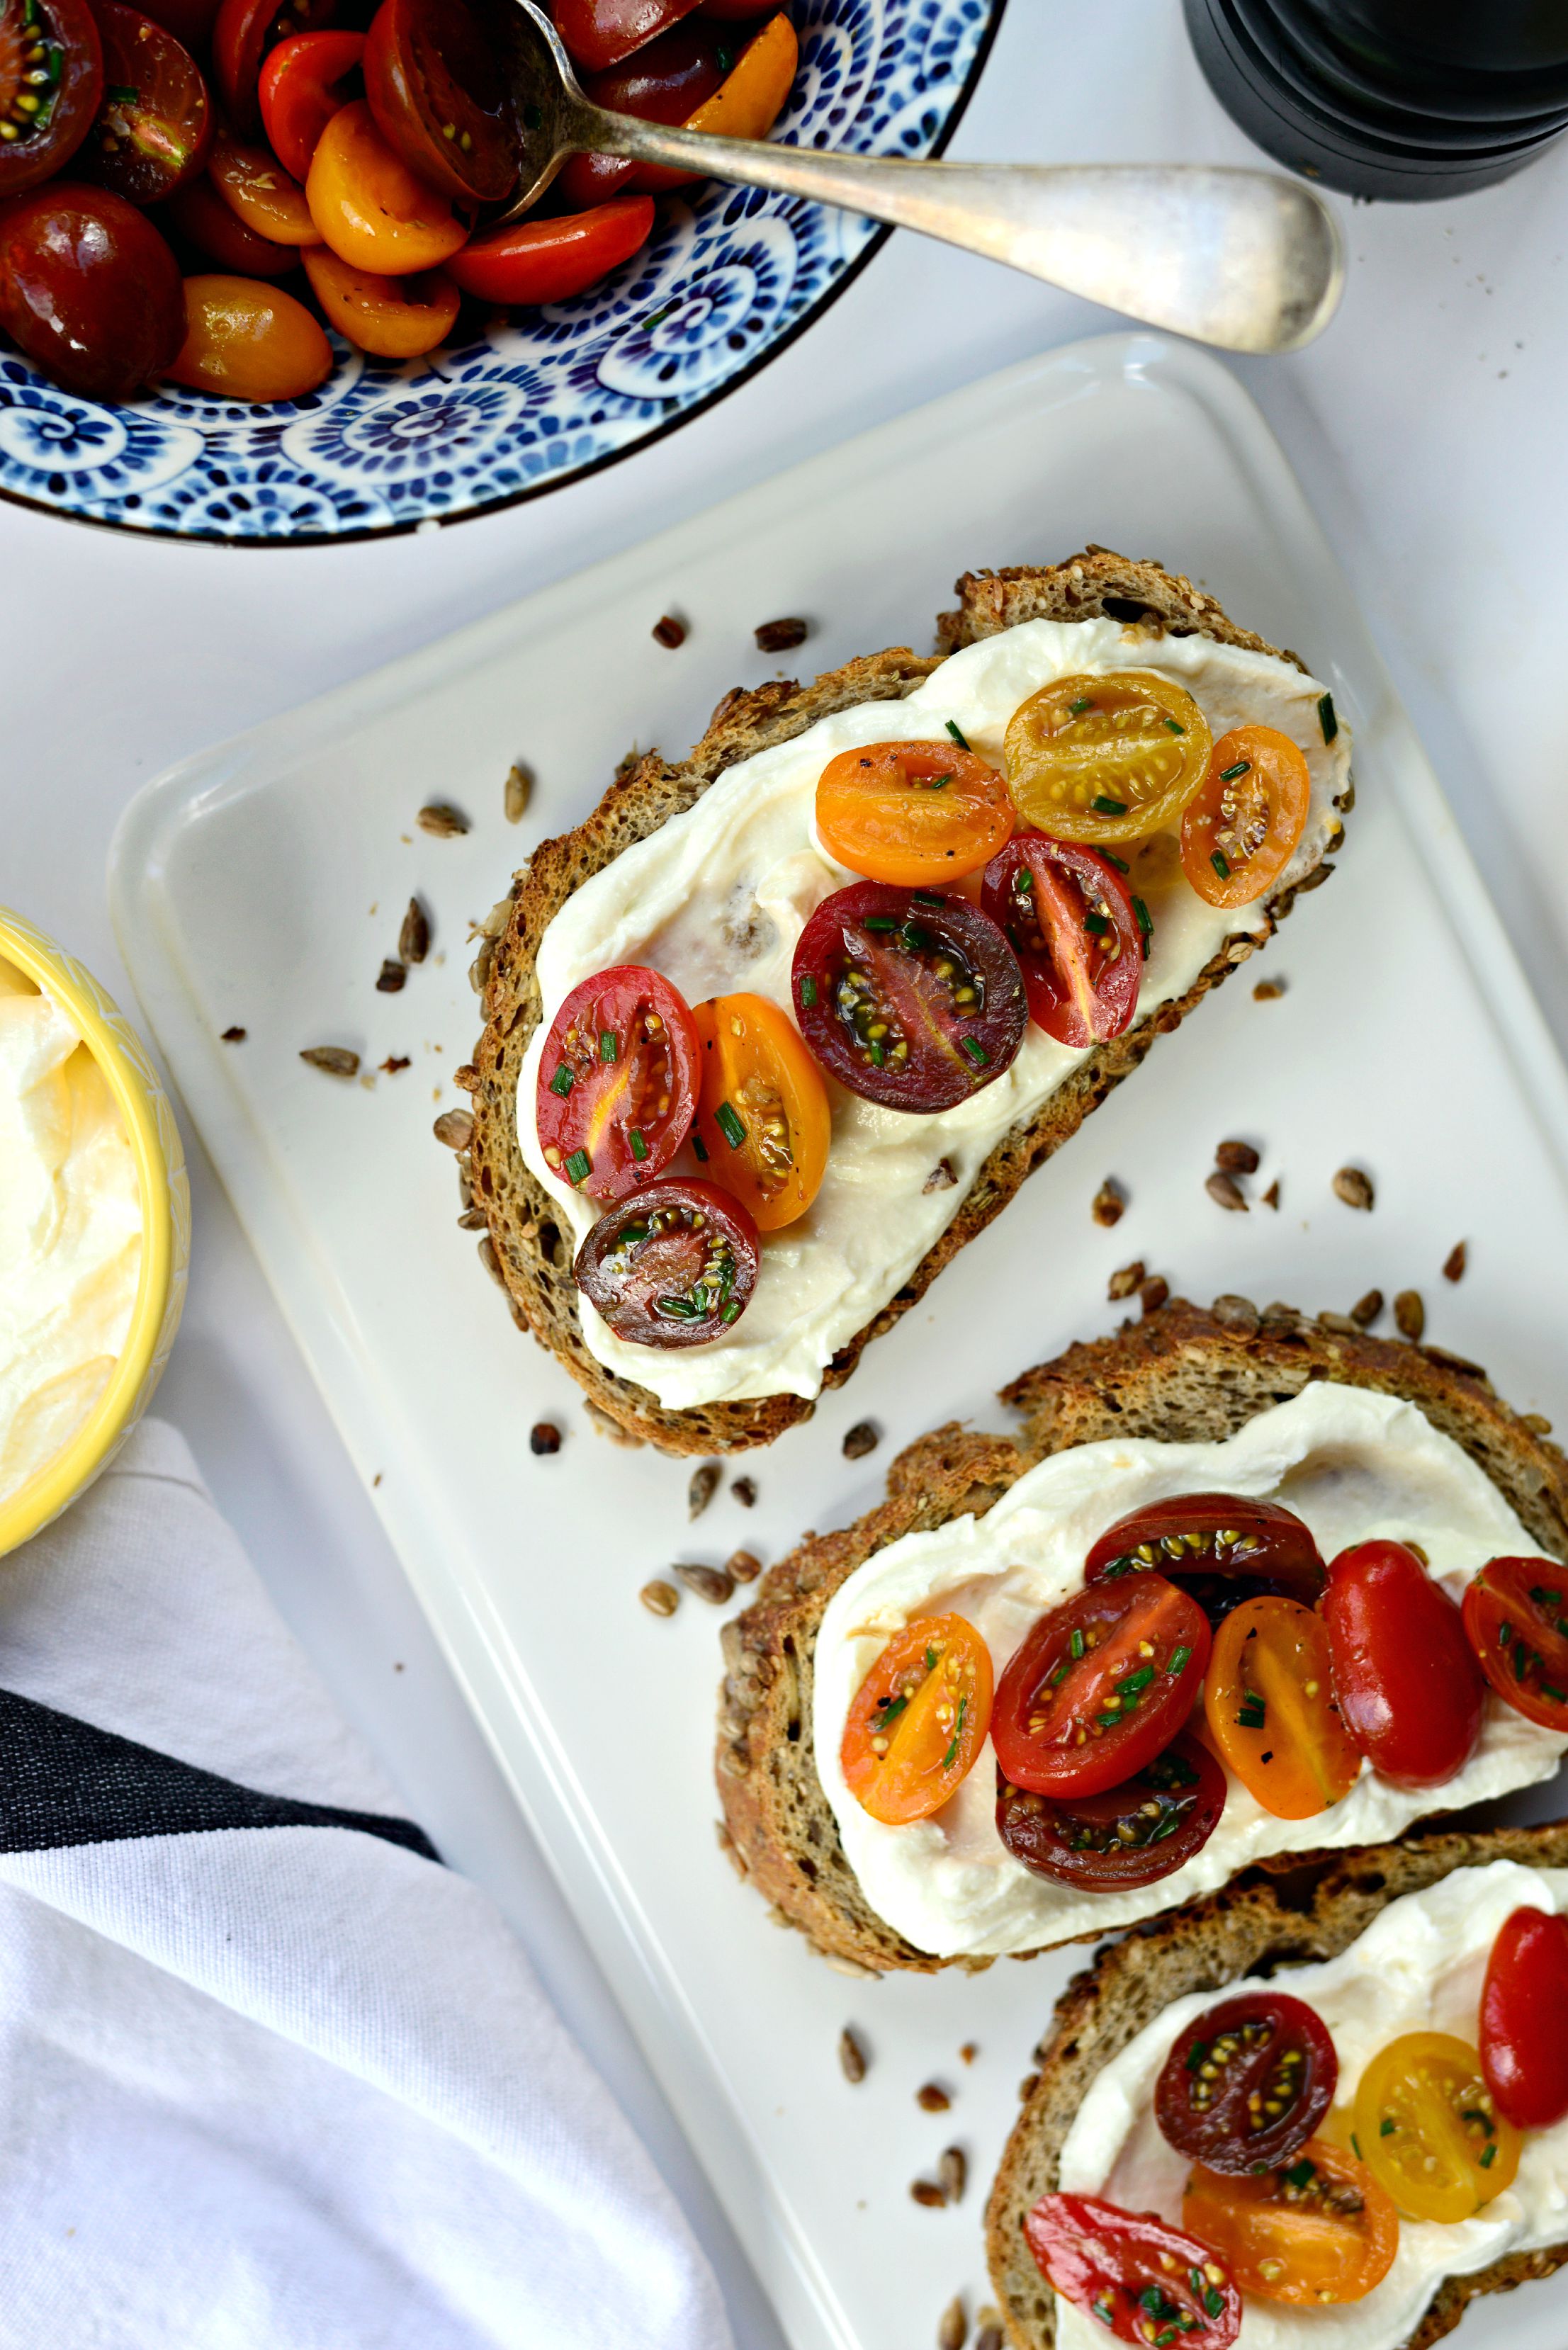 Whipped Feta with Marinated Tomatoes on Toast - Simply Scratch